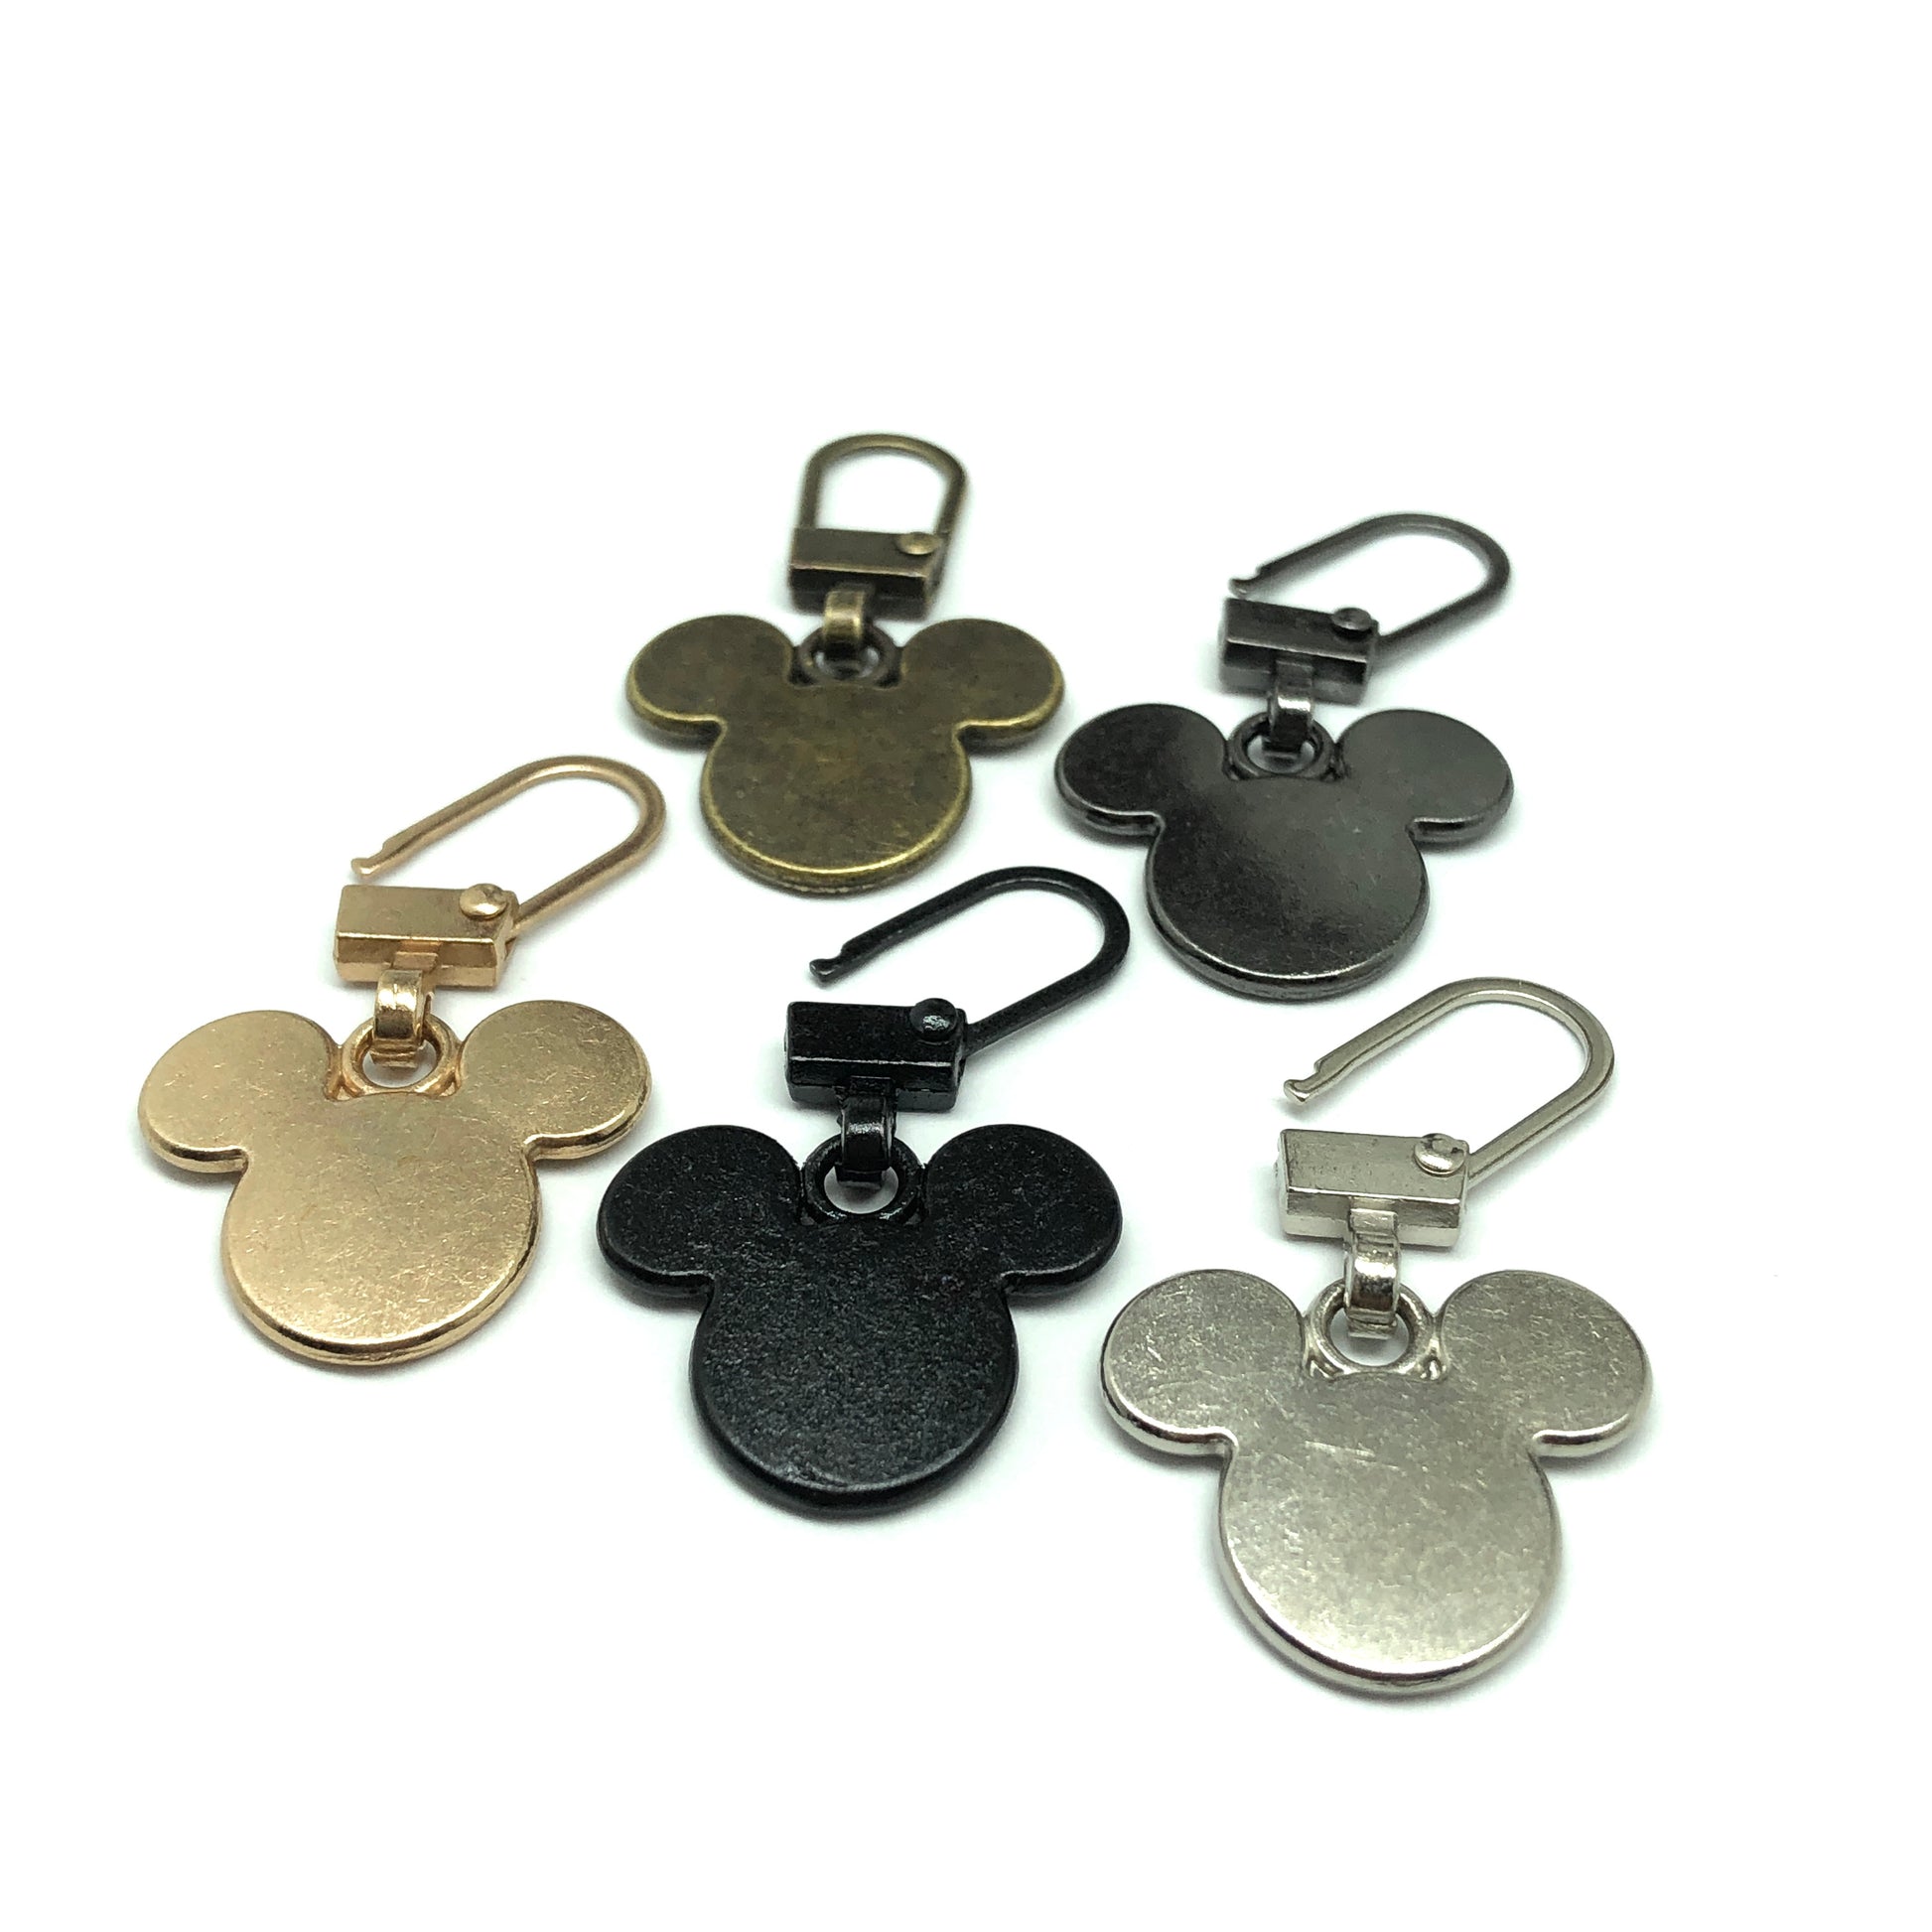 Zipper Repair Charms, Mickey Mouse Zipper Pull Repair Charm Rustic Gold -  for Repair or Decorate Shoes, Purses, Keychains + More